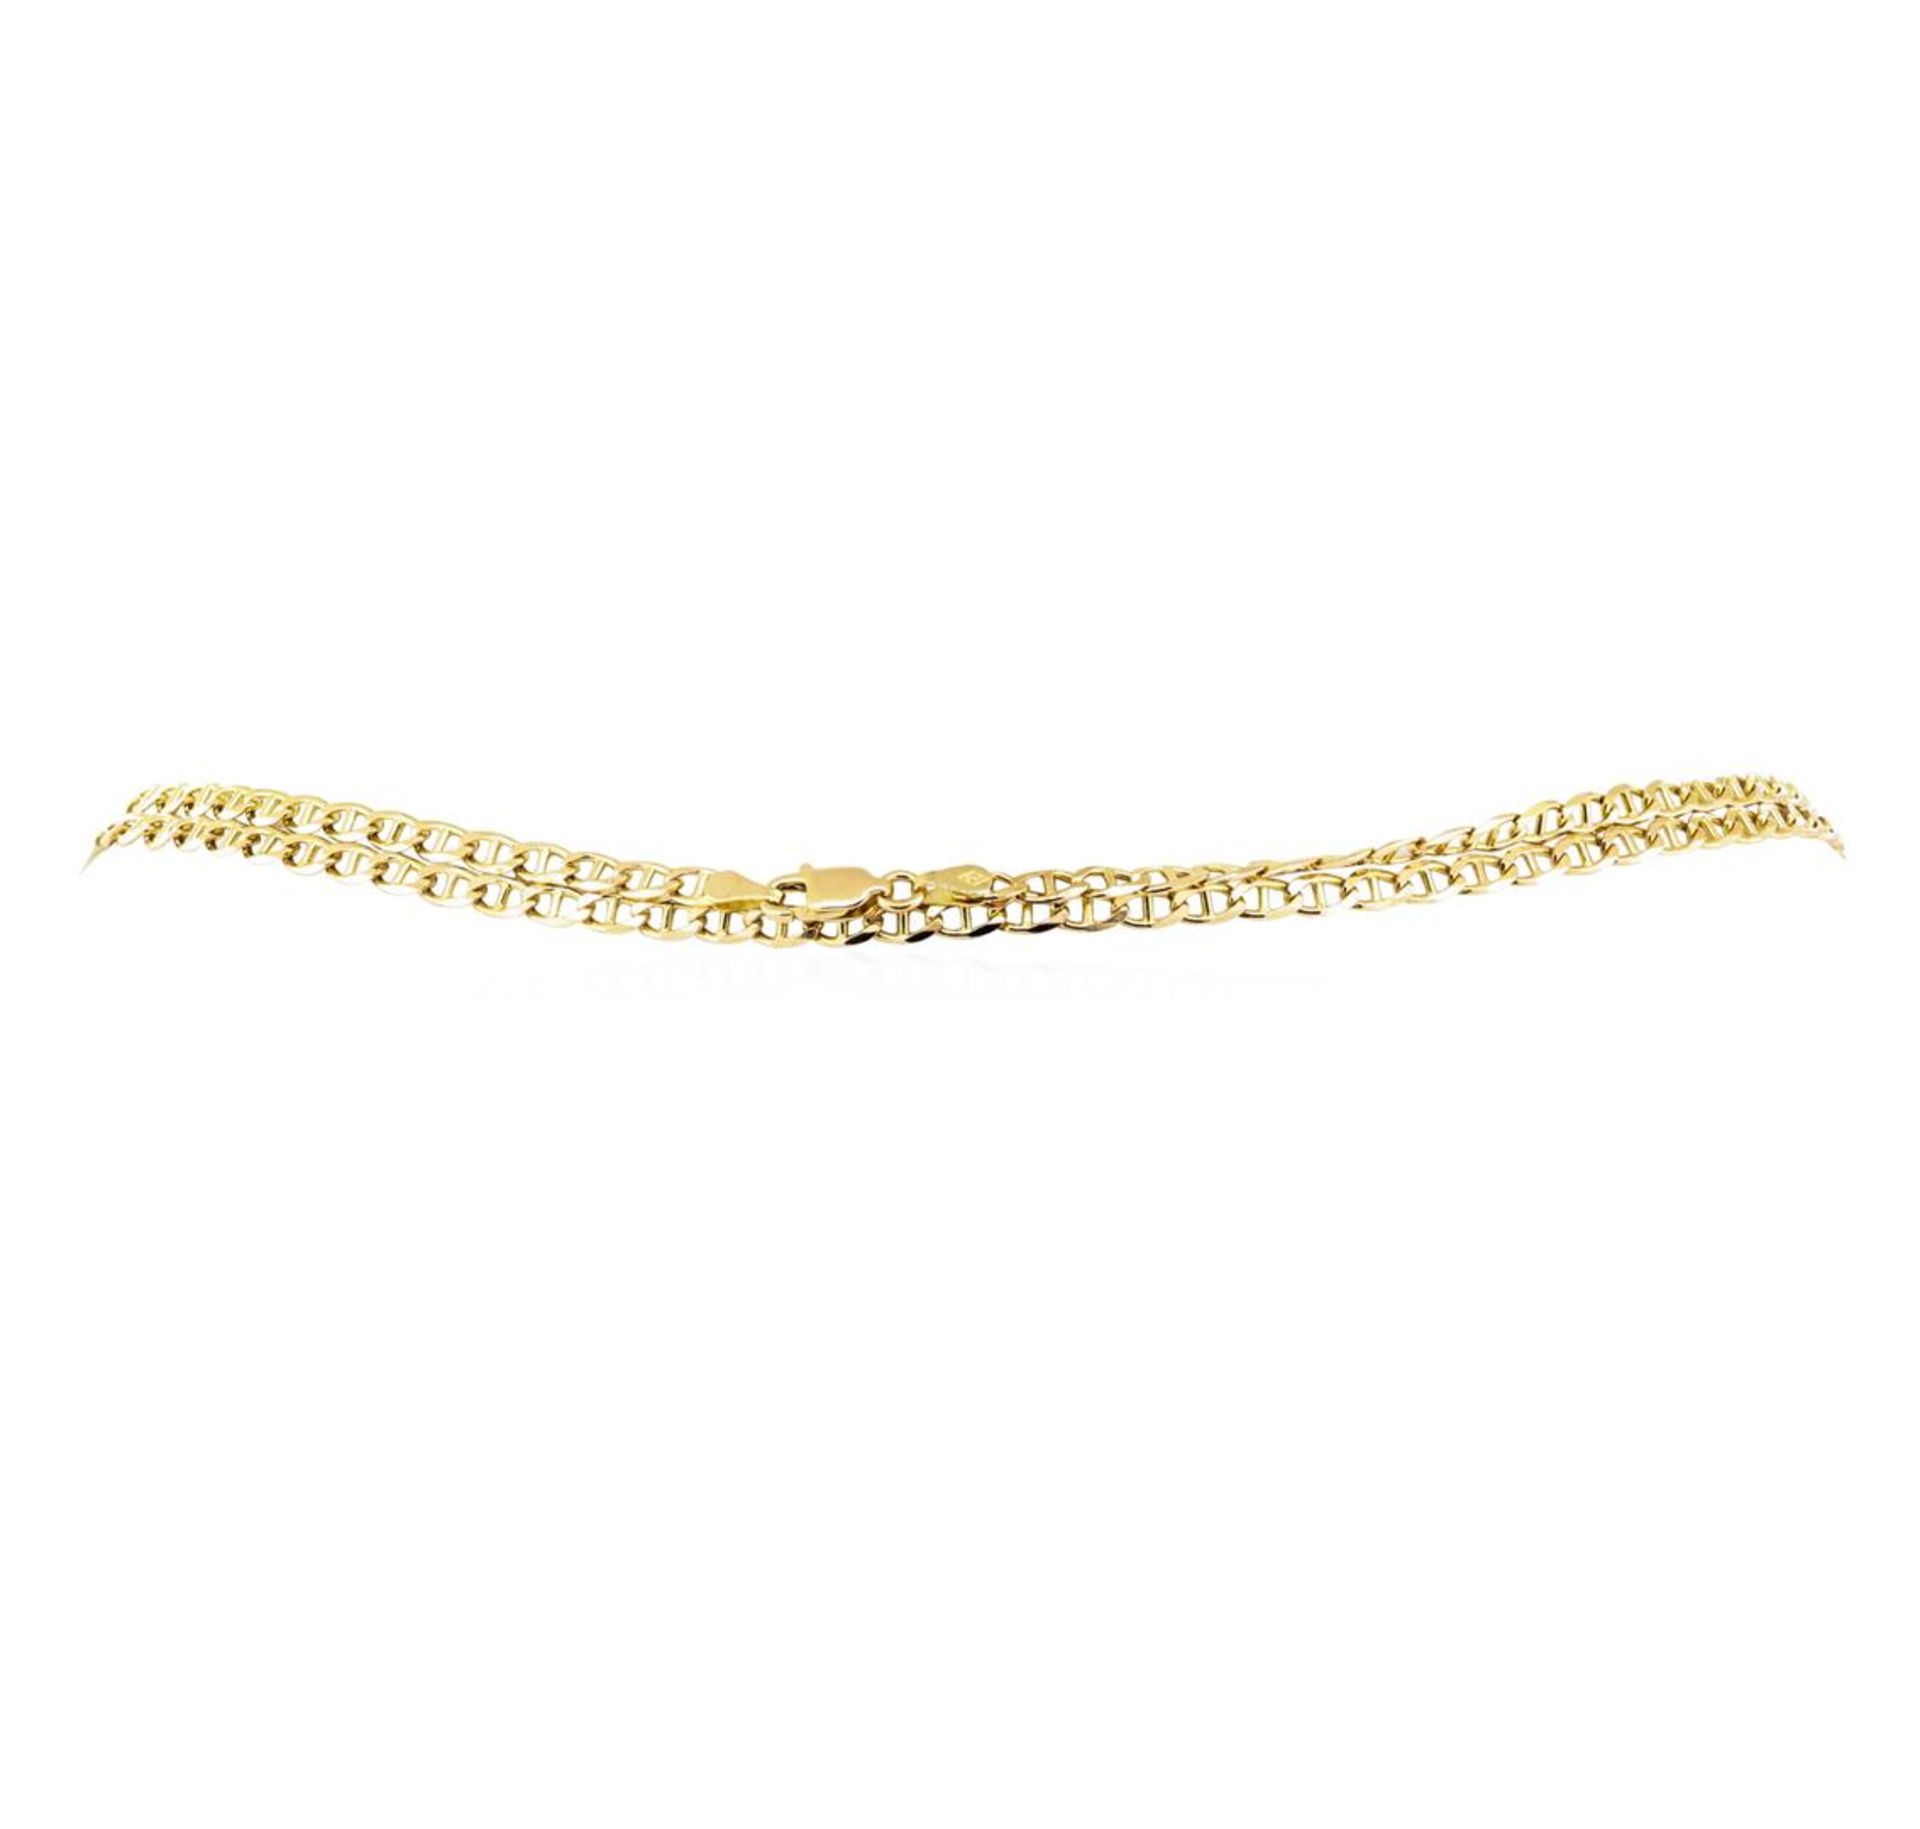 Thirty Inch Anchor Link Chain - 14KT Yellow Gold - Image 2 of 2